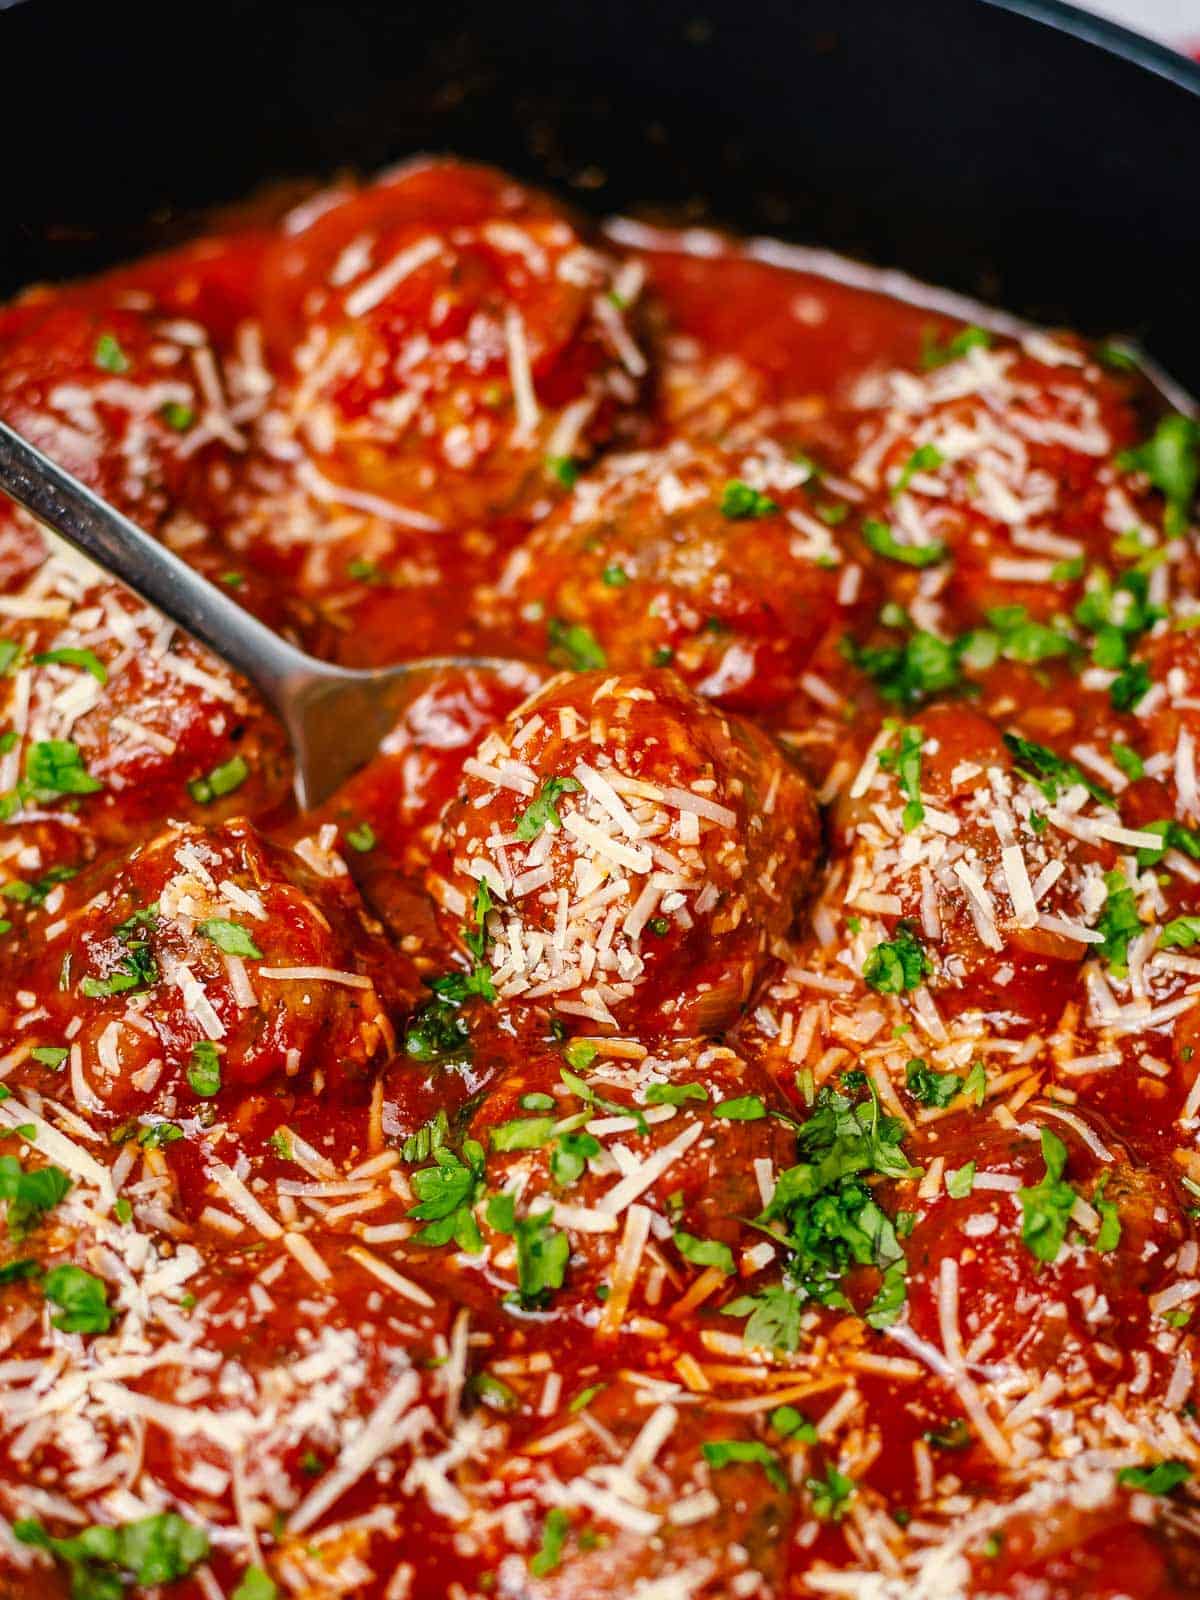 oven baked meatballs simmering in tomato sauce in a black skillet